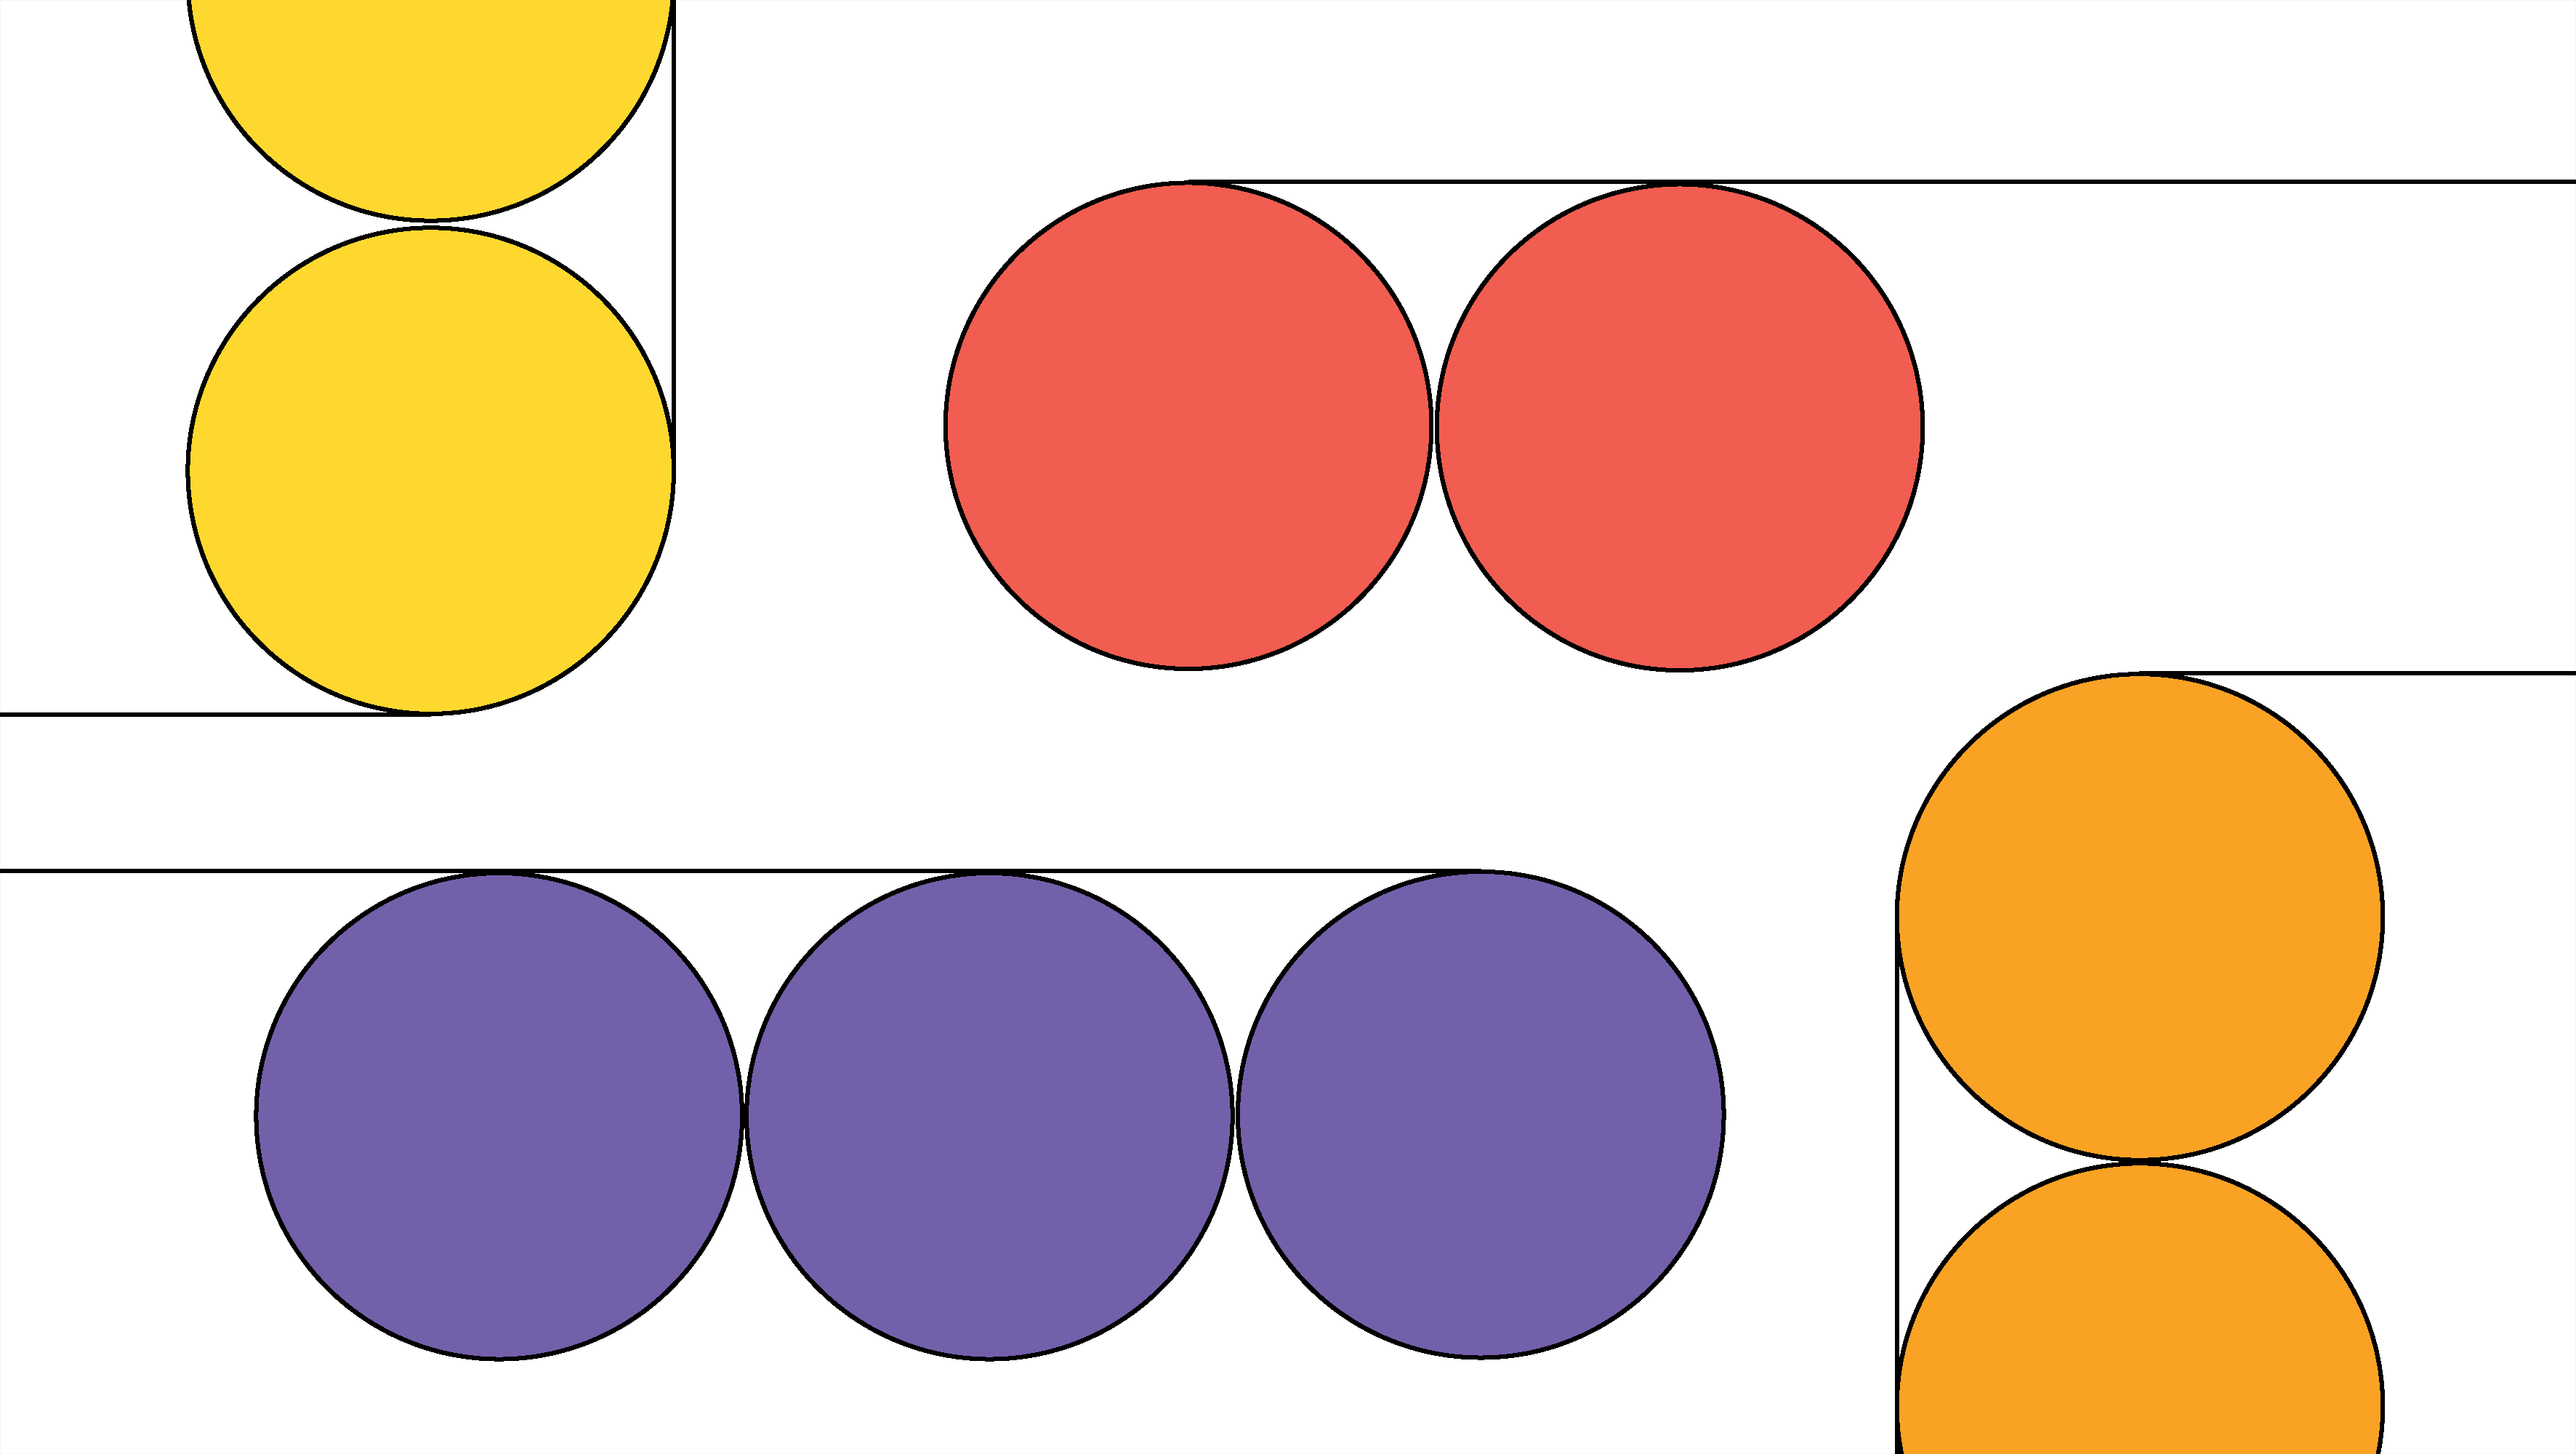 Abstract image of yellow, red, purple, and orange circles connected with thin lines.